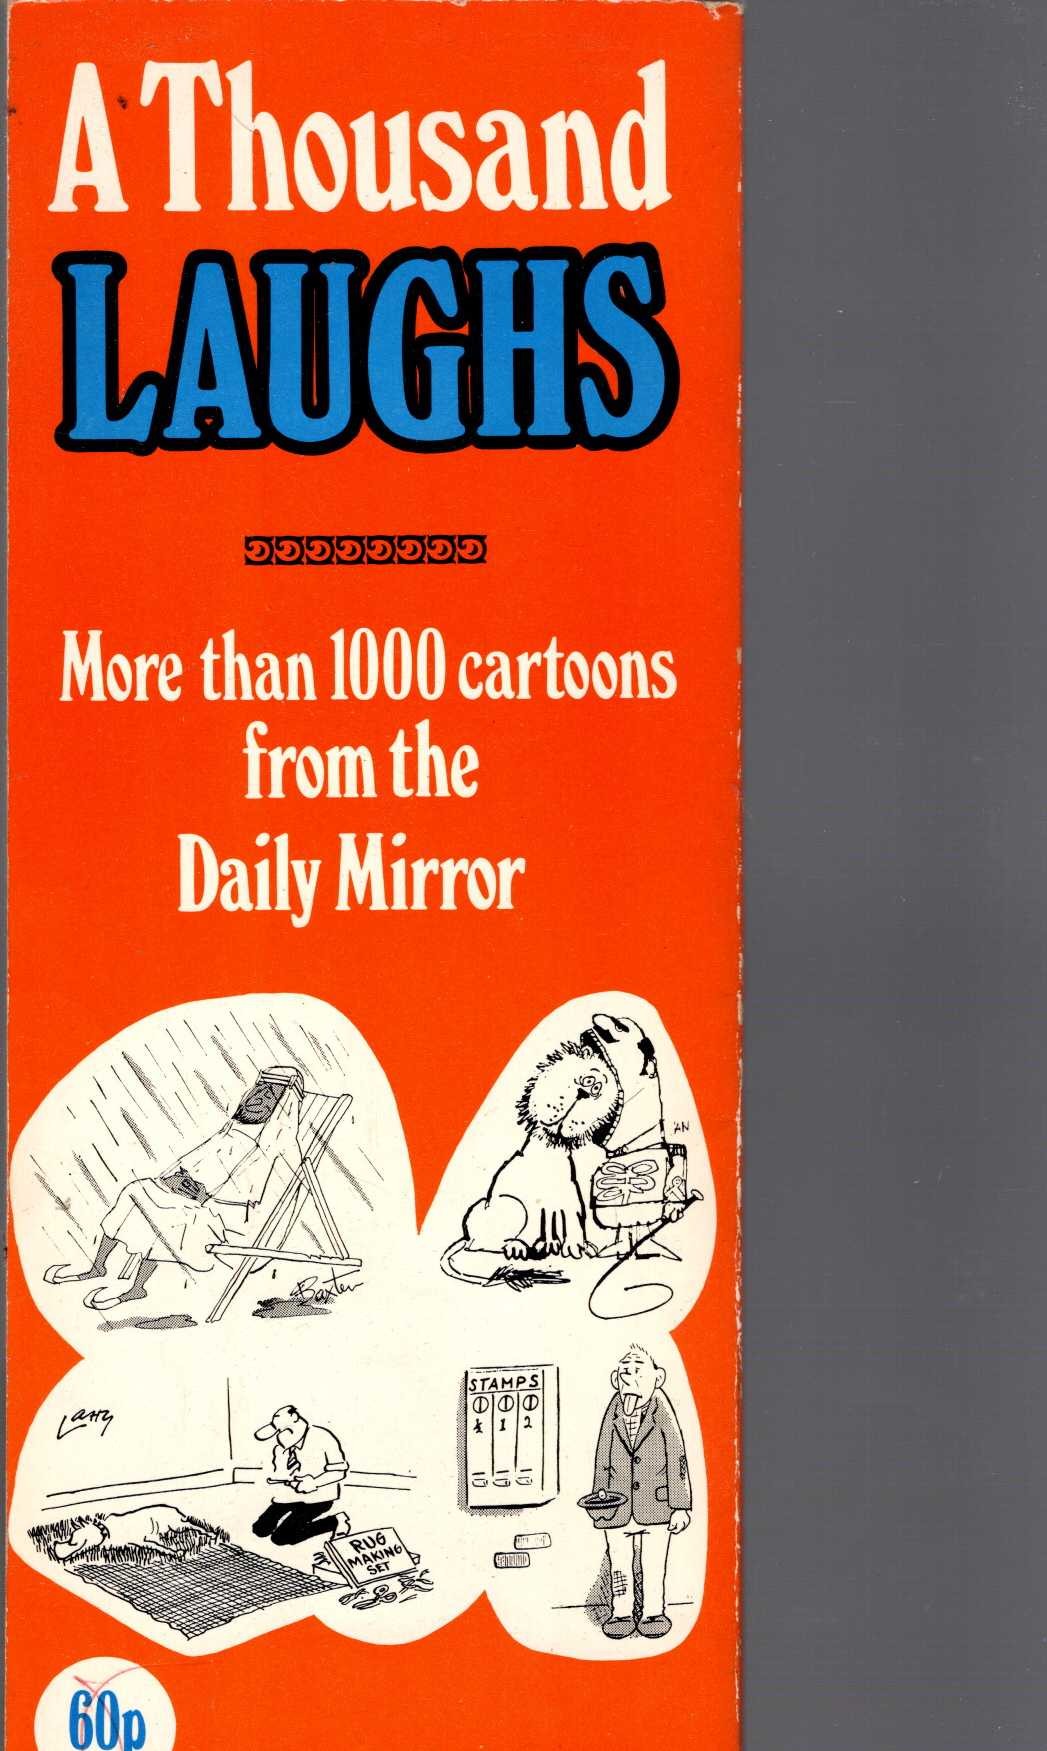 The Daily Mirror  A THOUSAND LAUGHS magnified rear book cover image